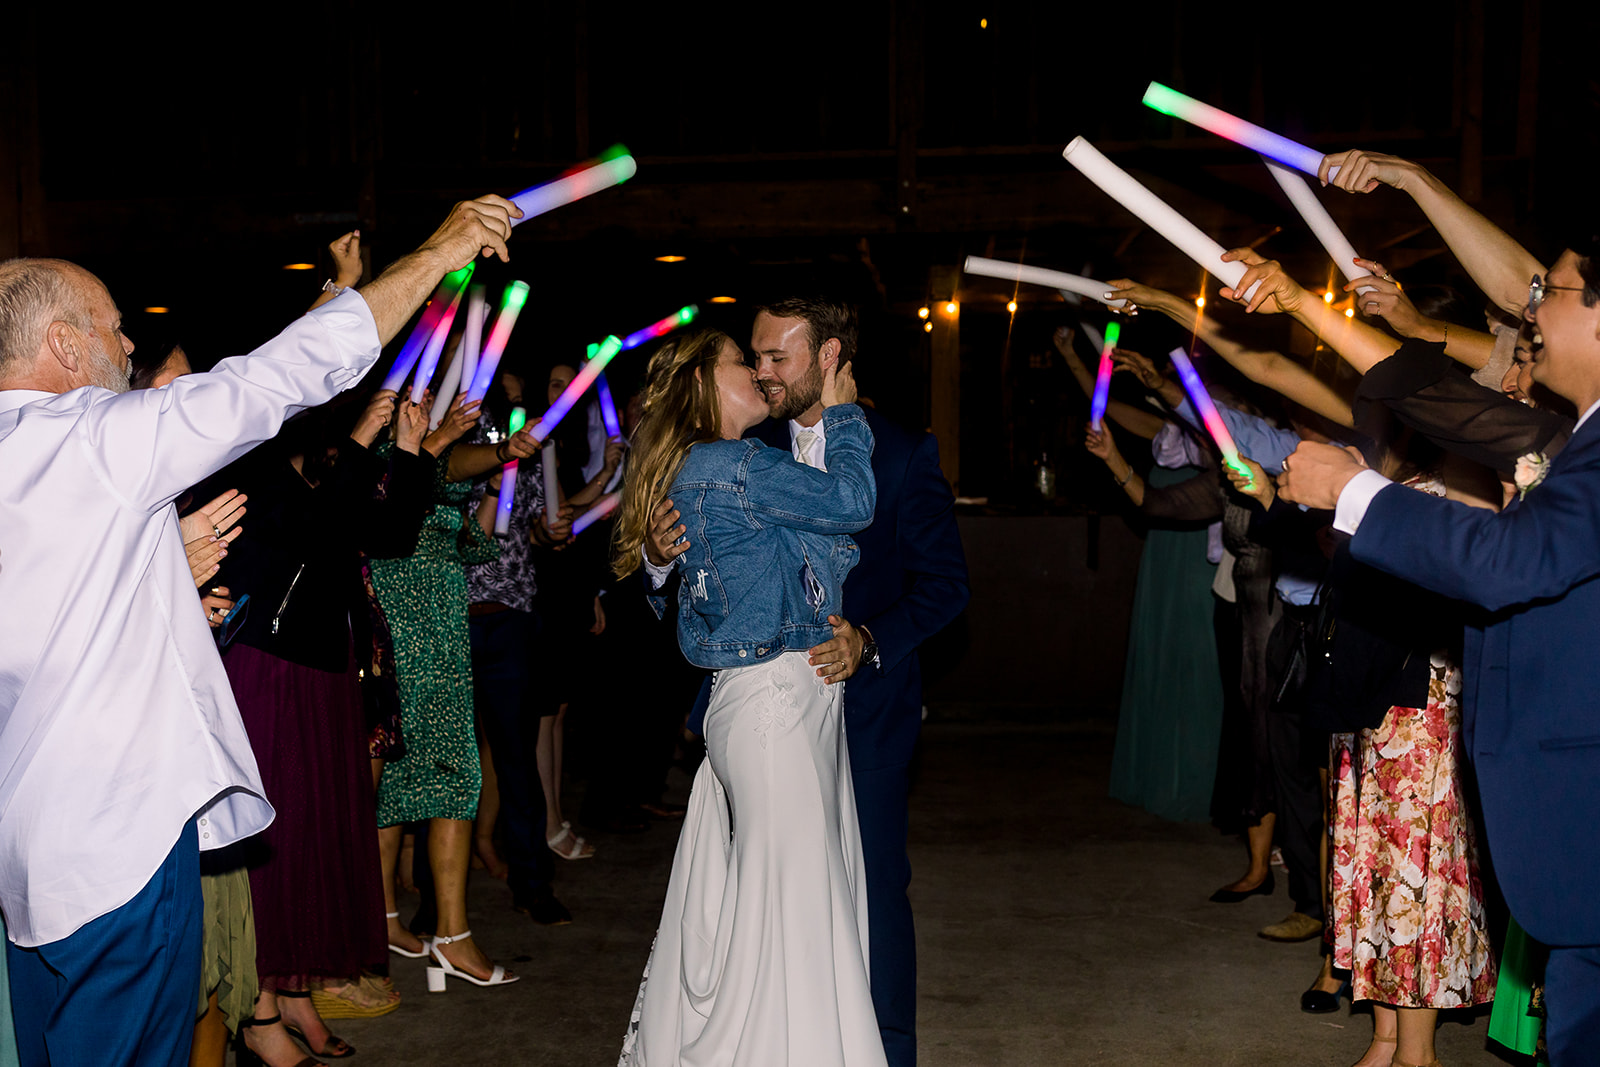 The magical glow stick send-off, capturing the joyous finale of Caroline and Thomas's unforgettable day at Higuera Ranch